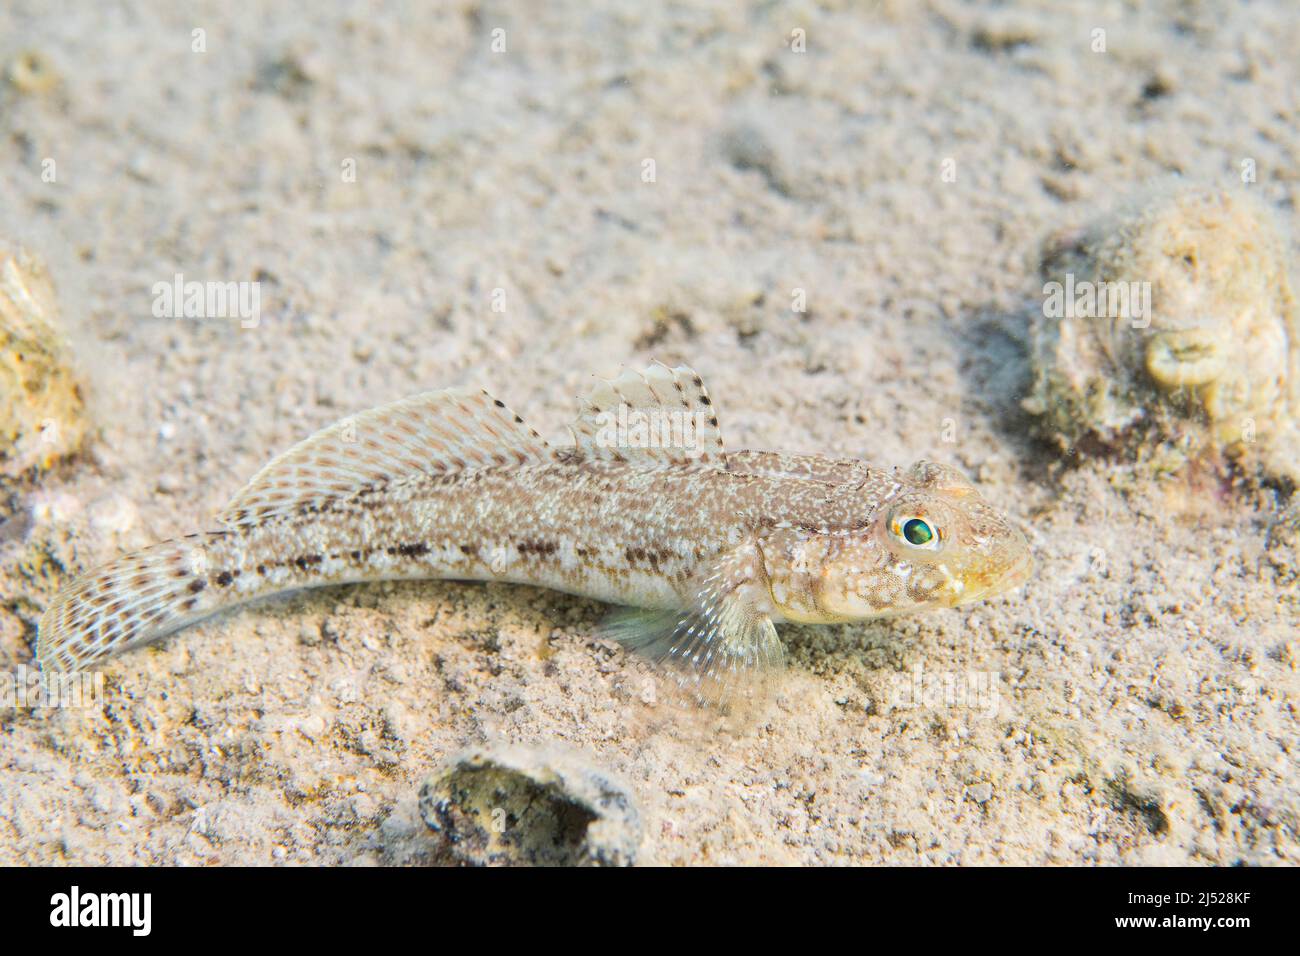 The slender goby (Gobius geniporus) is a species of goby endemic to the Mediterranean Sea. Stock Photo